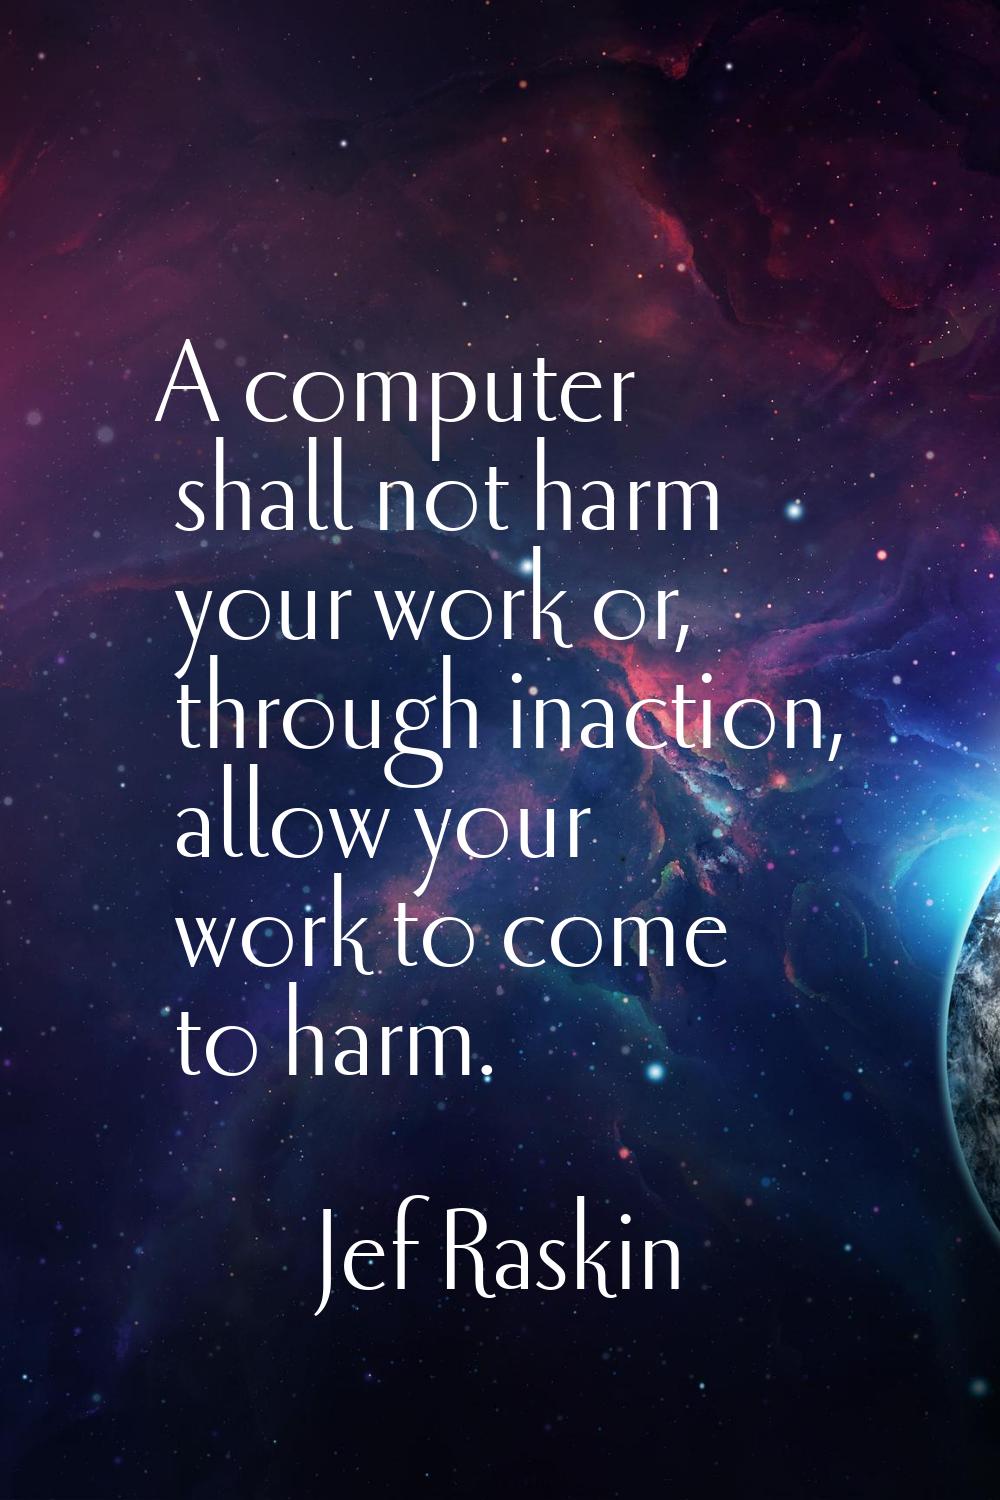 A computer shall not harm your work or, through inaction, allow your work to come to harm.